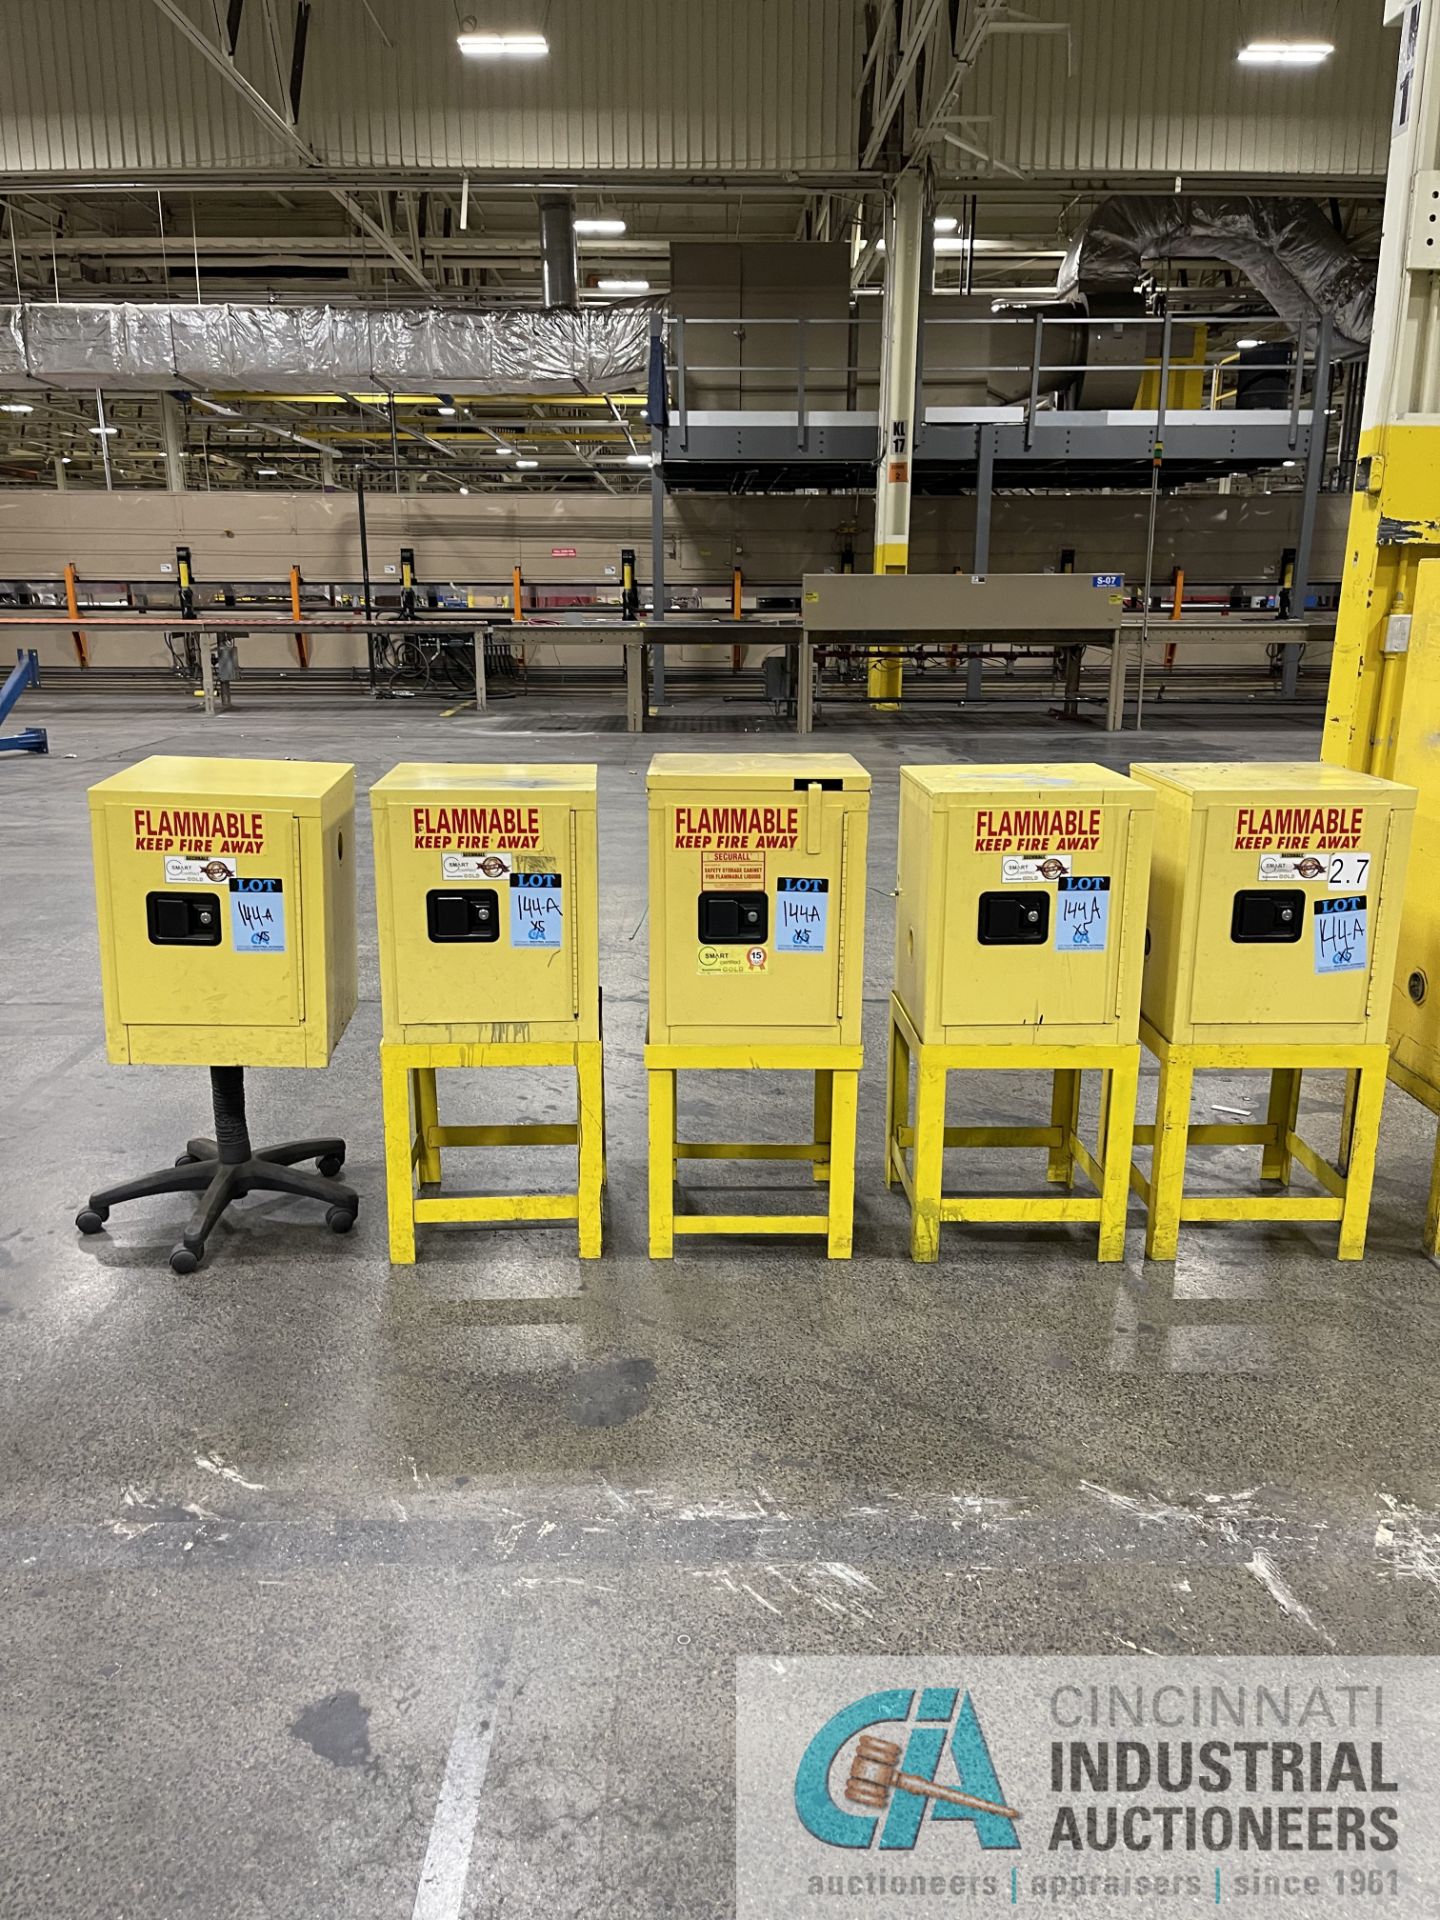 4 GALLON CAPACITY JUSTRITE SURE GRIP FLAMMABLE LIQUID STORAGE CAIBNETS WITH (4) STANDS - Image 3 of 3